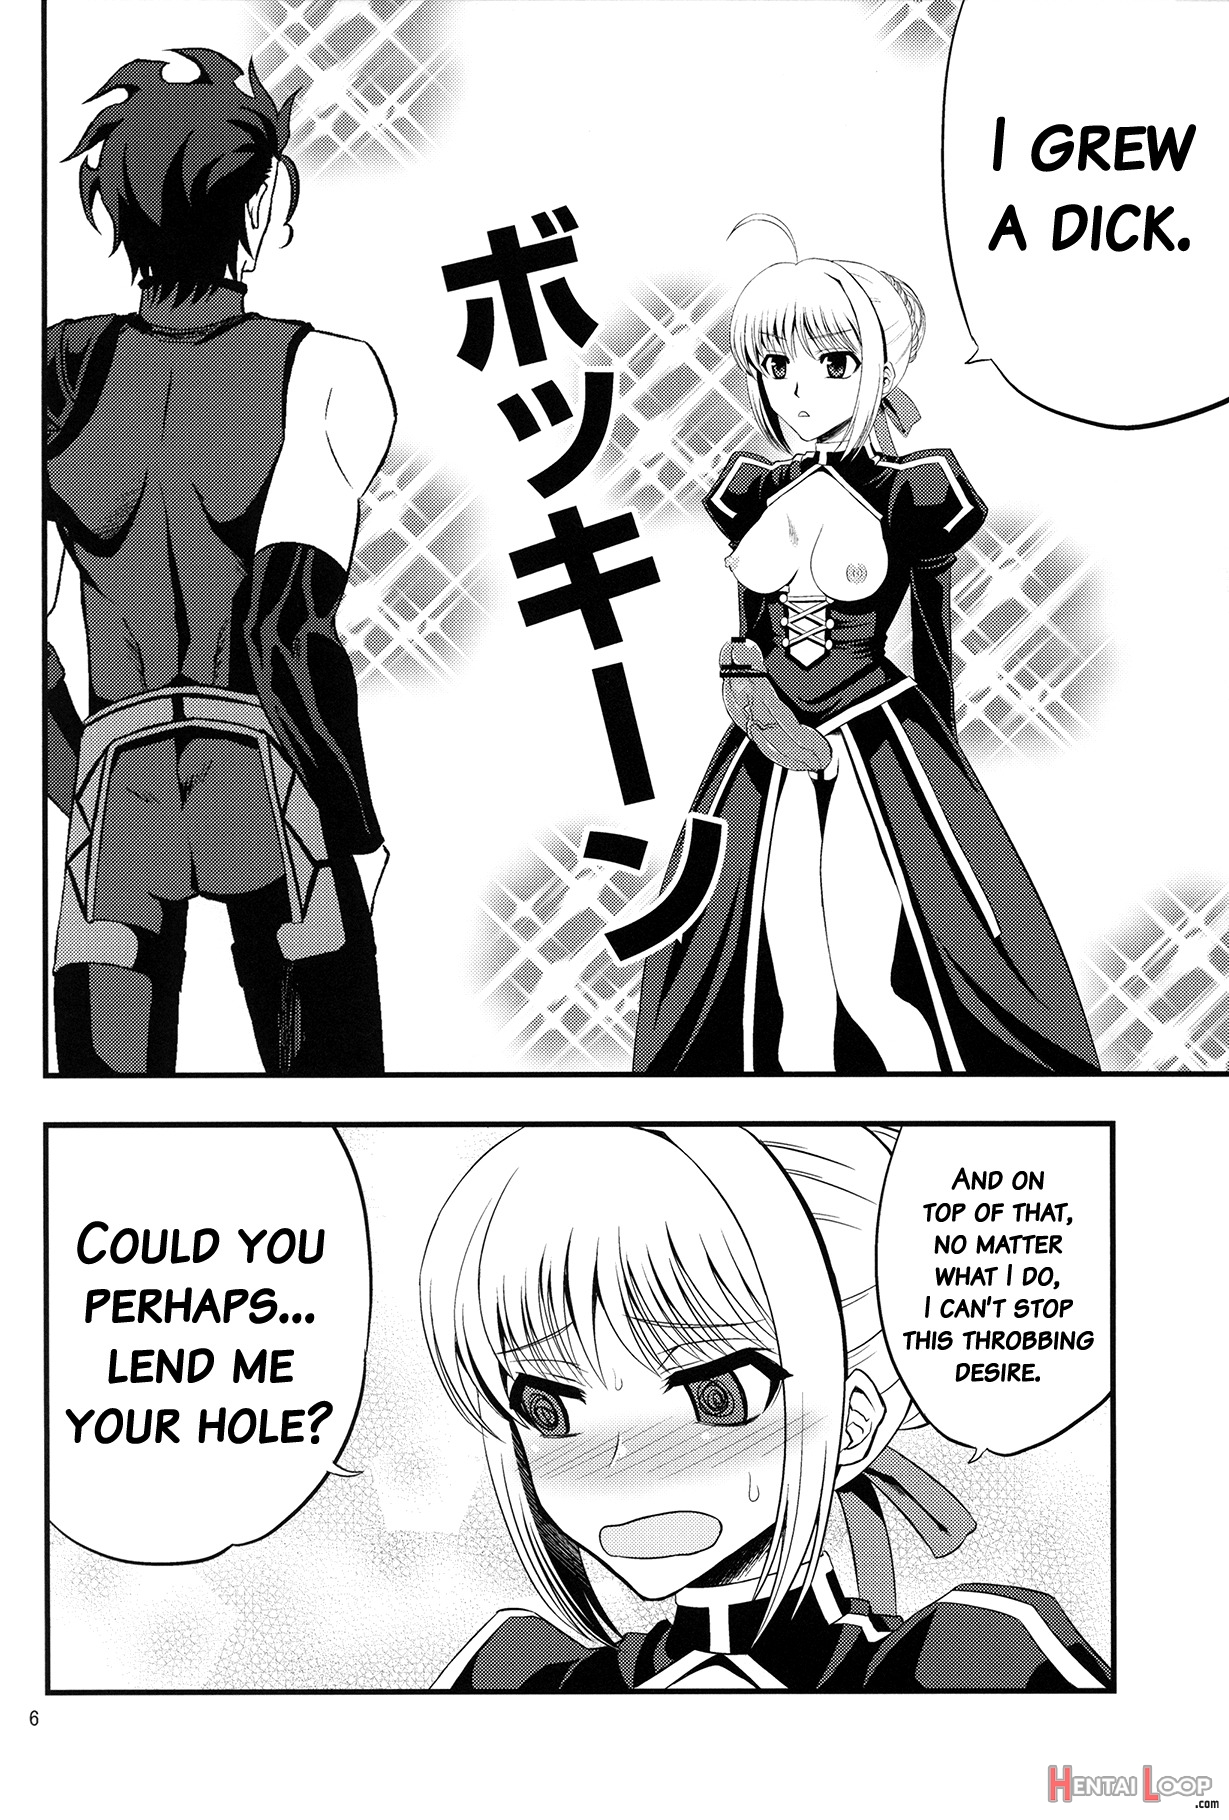 Saber Grew A Dick page 4